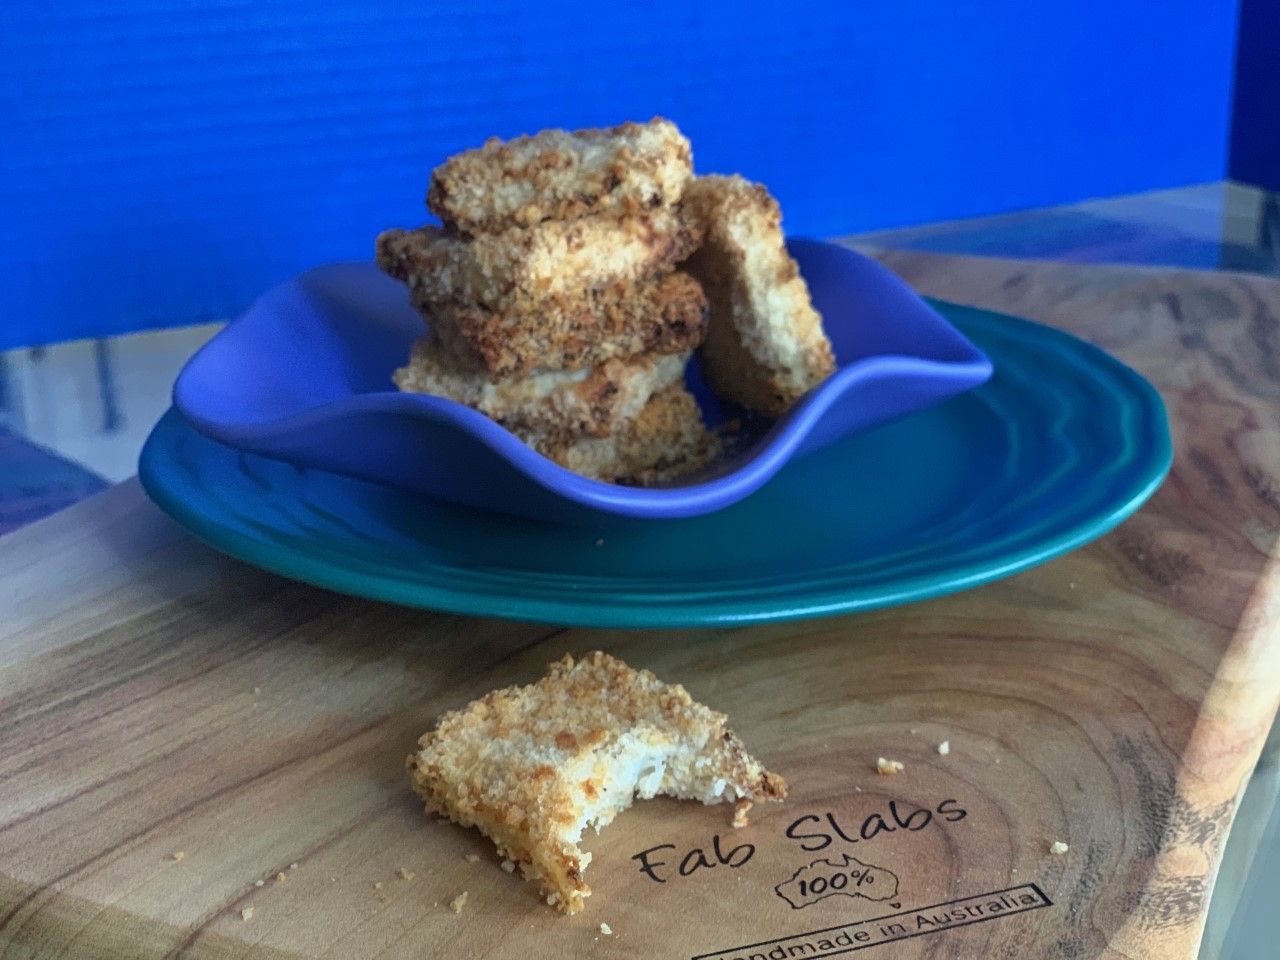 Parmesan Cauliflower Tater Tots dipped in Panko and Baked